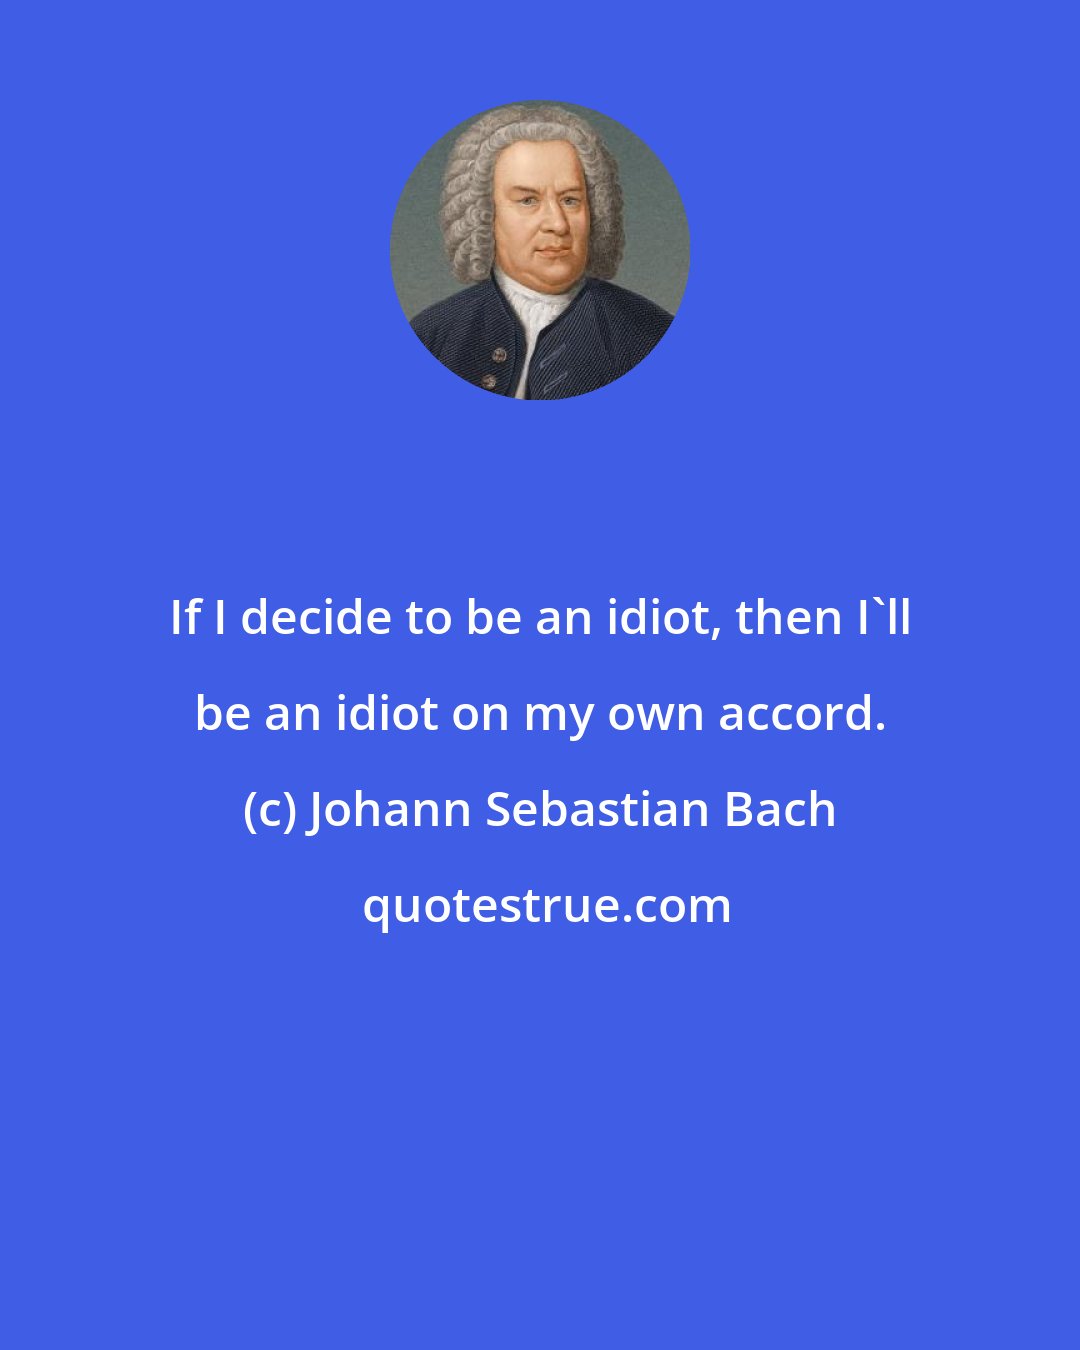 Johann Sebastian Bach: If I decide to be an idiot, then I'll be an idiot on my own accord.